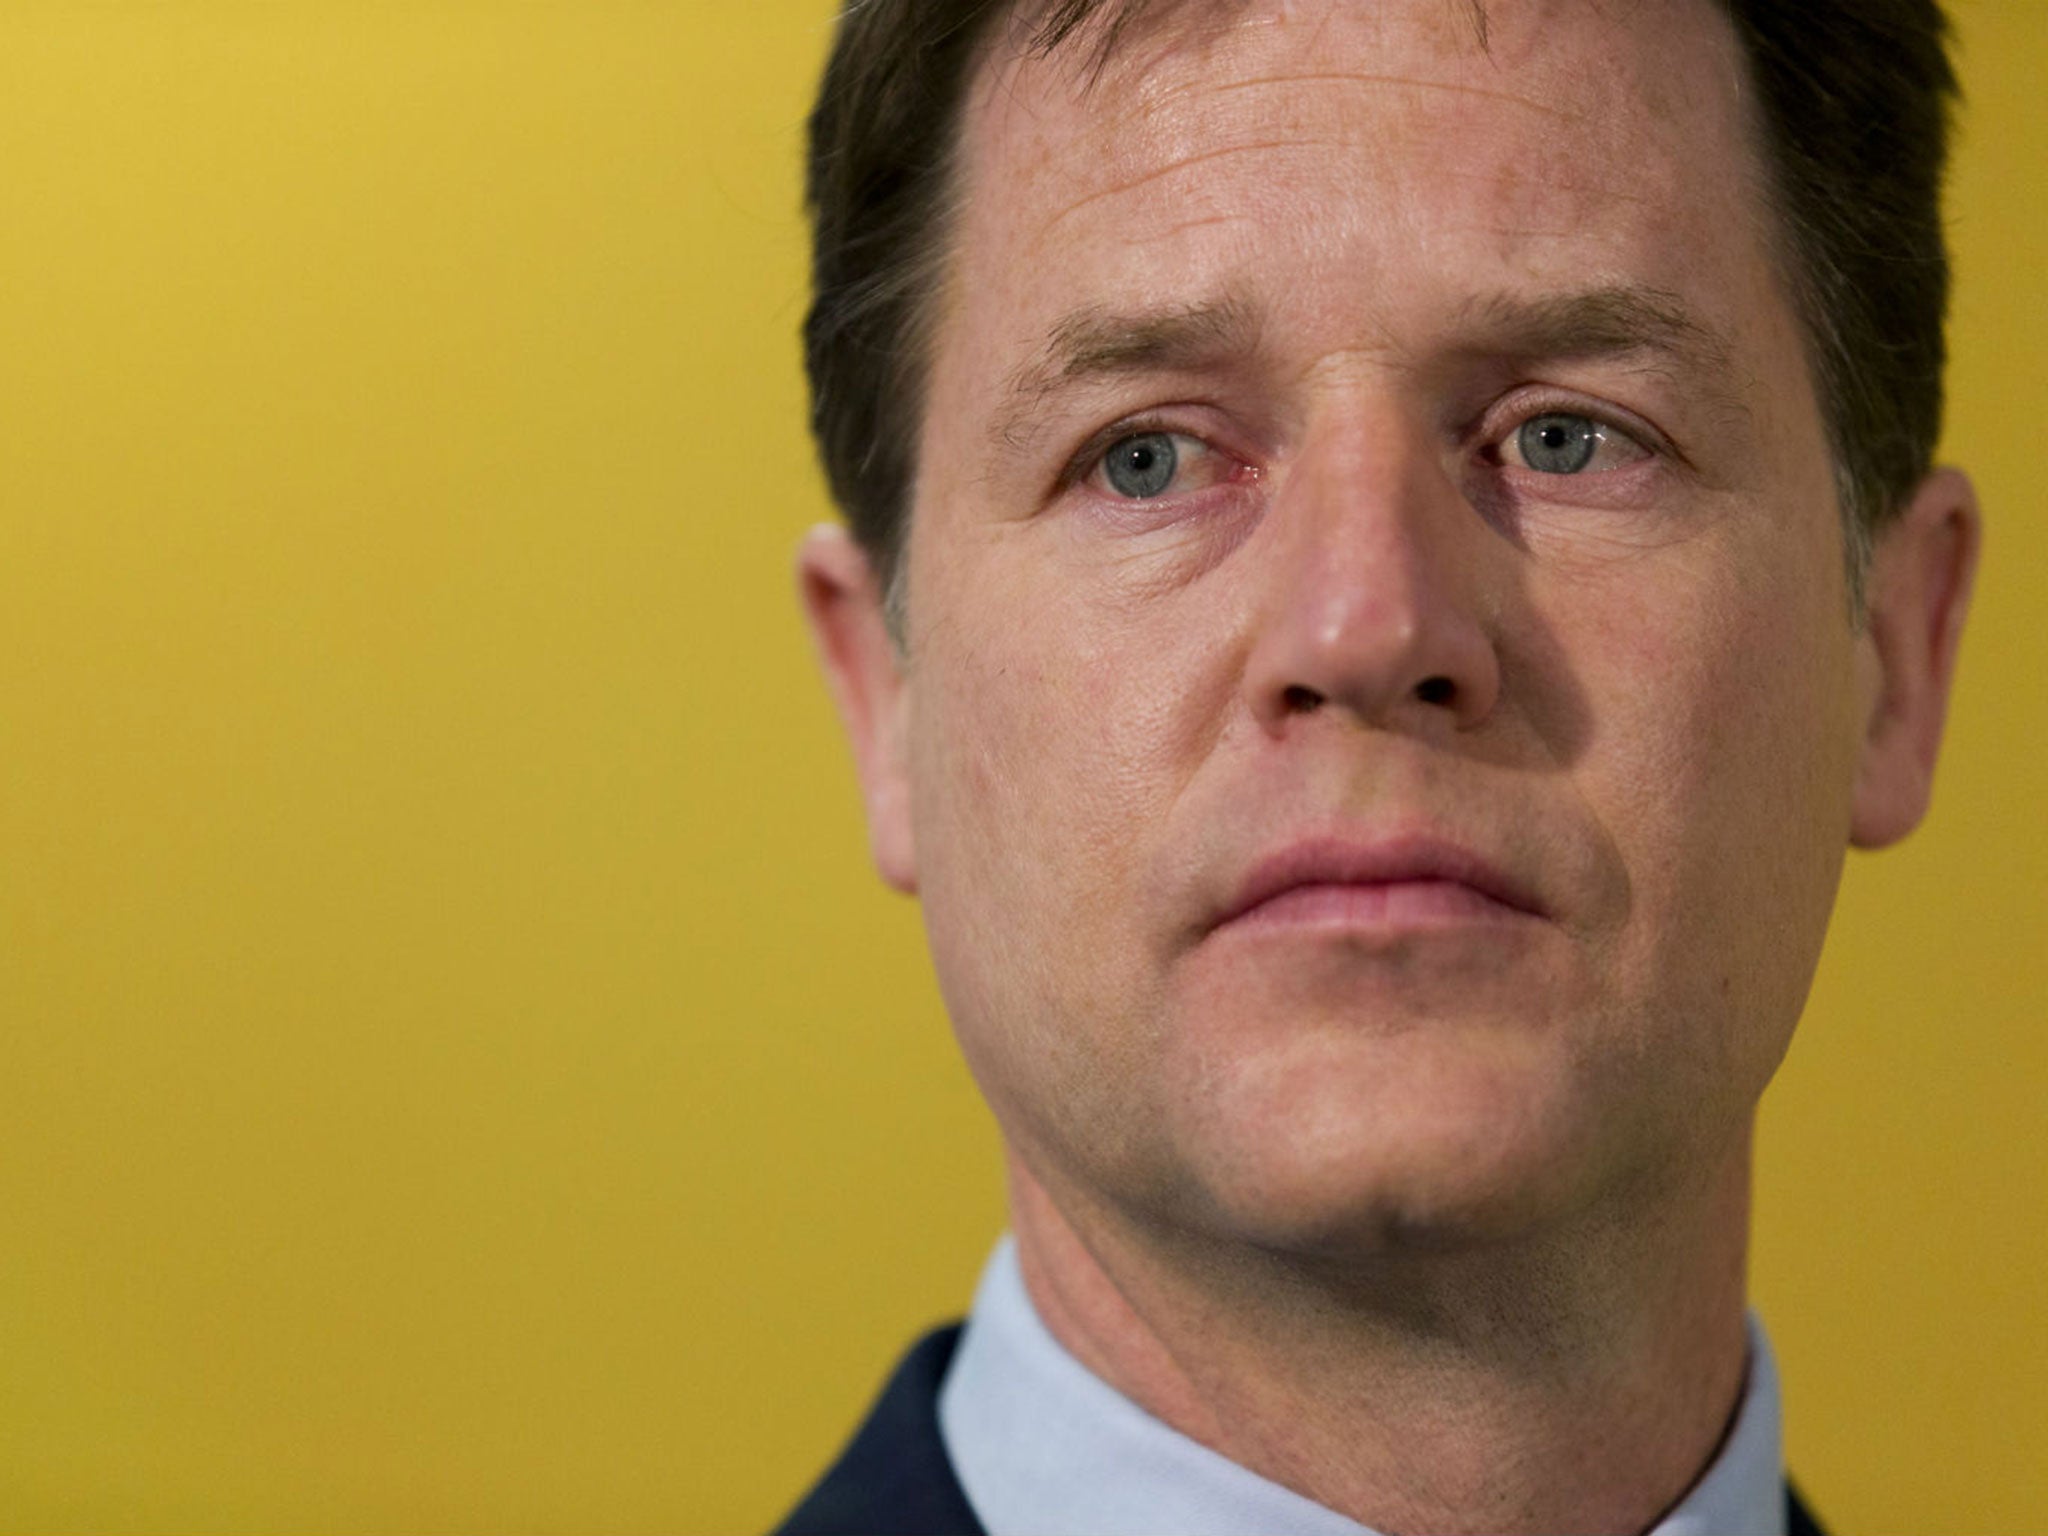 Nick Clegg resigned a day after polling day